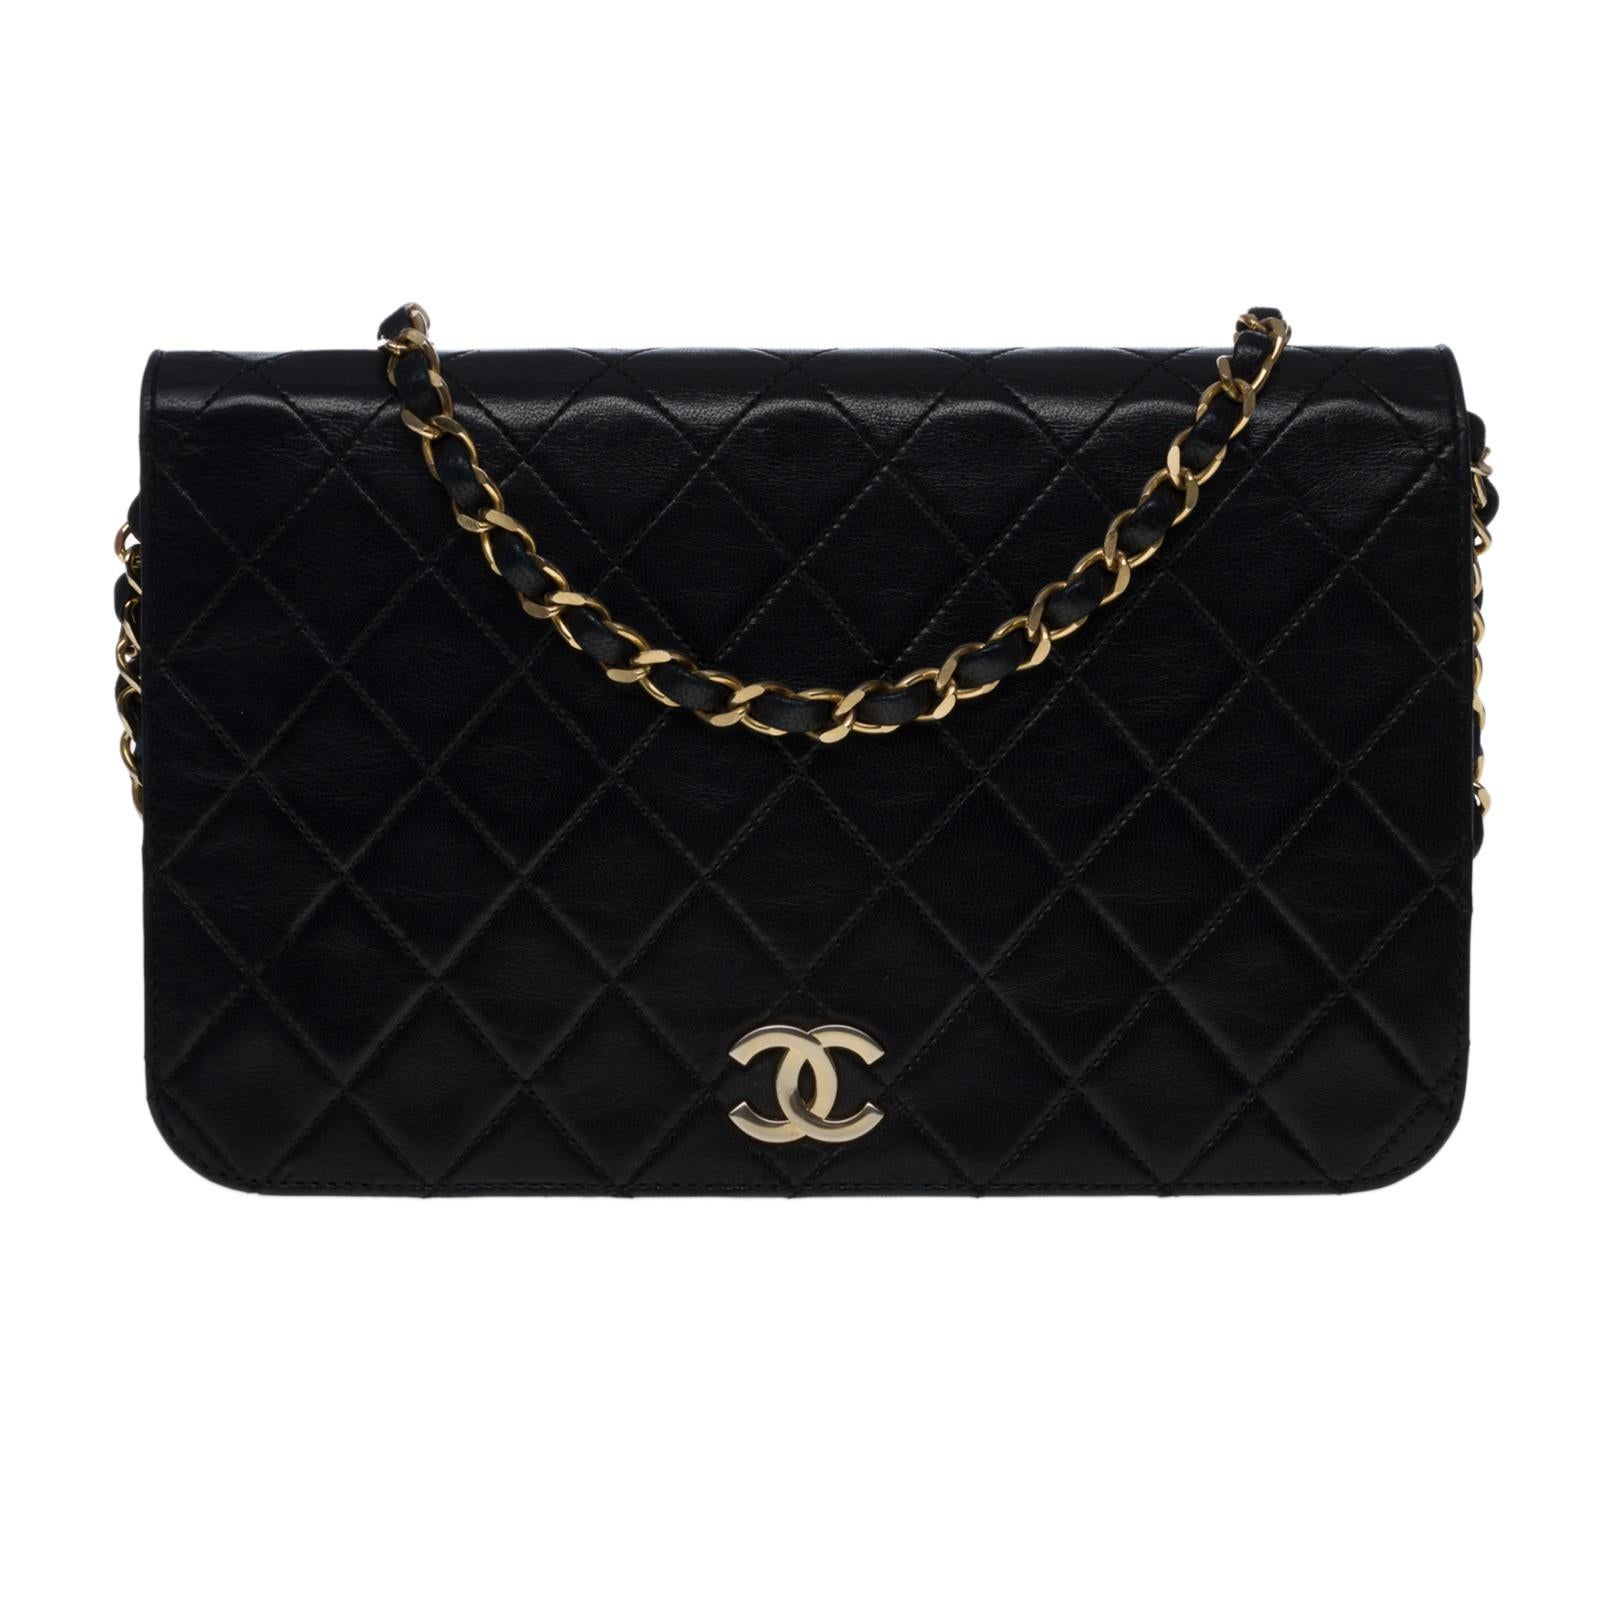 Wonderful Chanel Classique Full flap handbag in black quilted leather, hardware in gold metal, one chain strap in gold metal interwoven with black leather allowing the bag to be worn on the shoulder or accross the body
Flap closure, golden CC logo